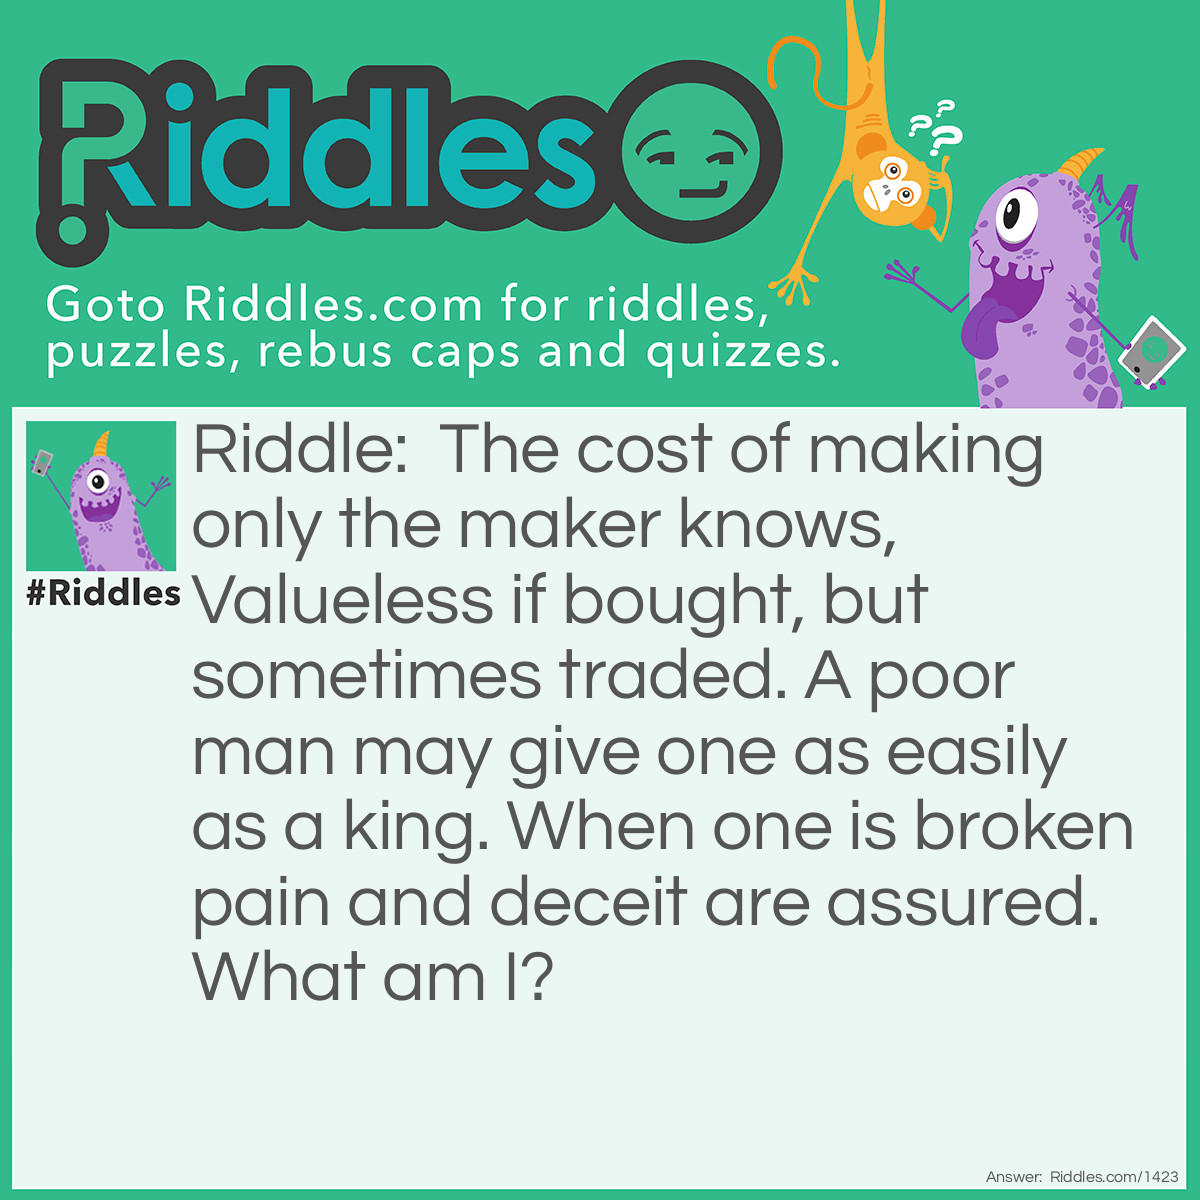 Riddle: The cost of making only the maker knows, Valueless if bought, but sometimes traded. A poor man may give one as easily as a king. When one is broken pain and deceit are assured. What am I? Answer: A Promise.